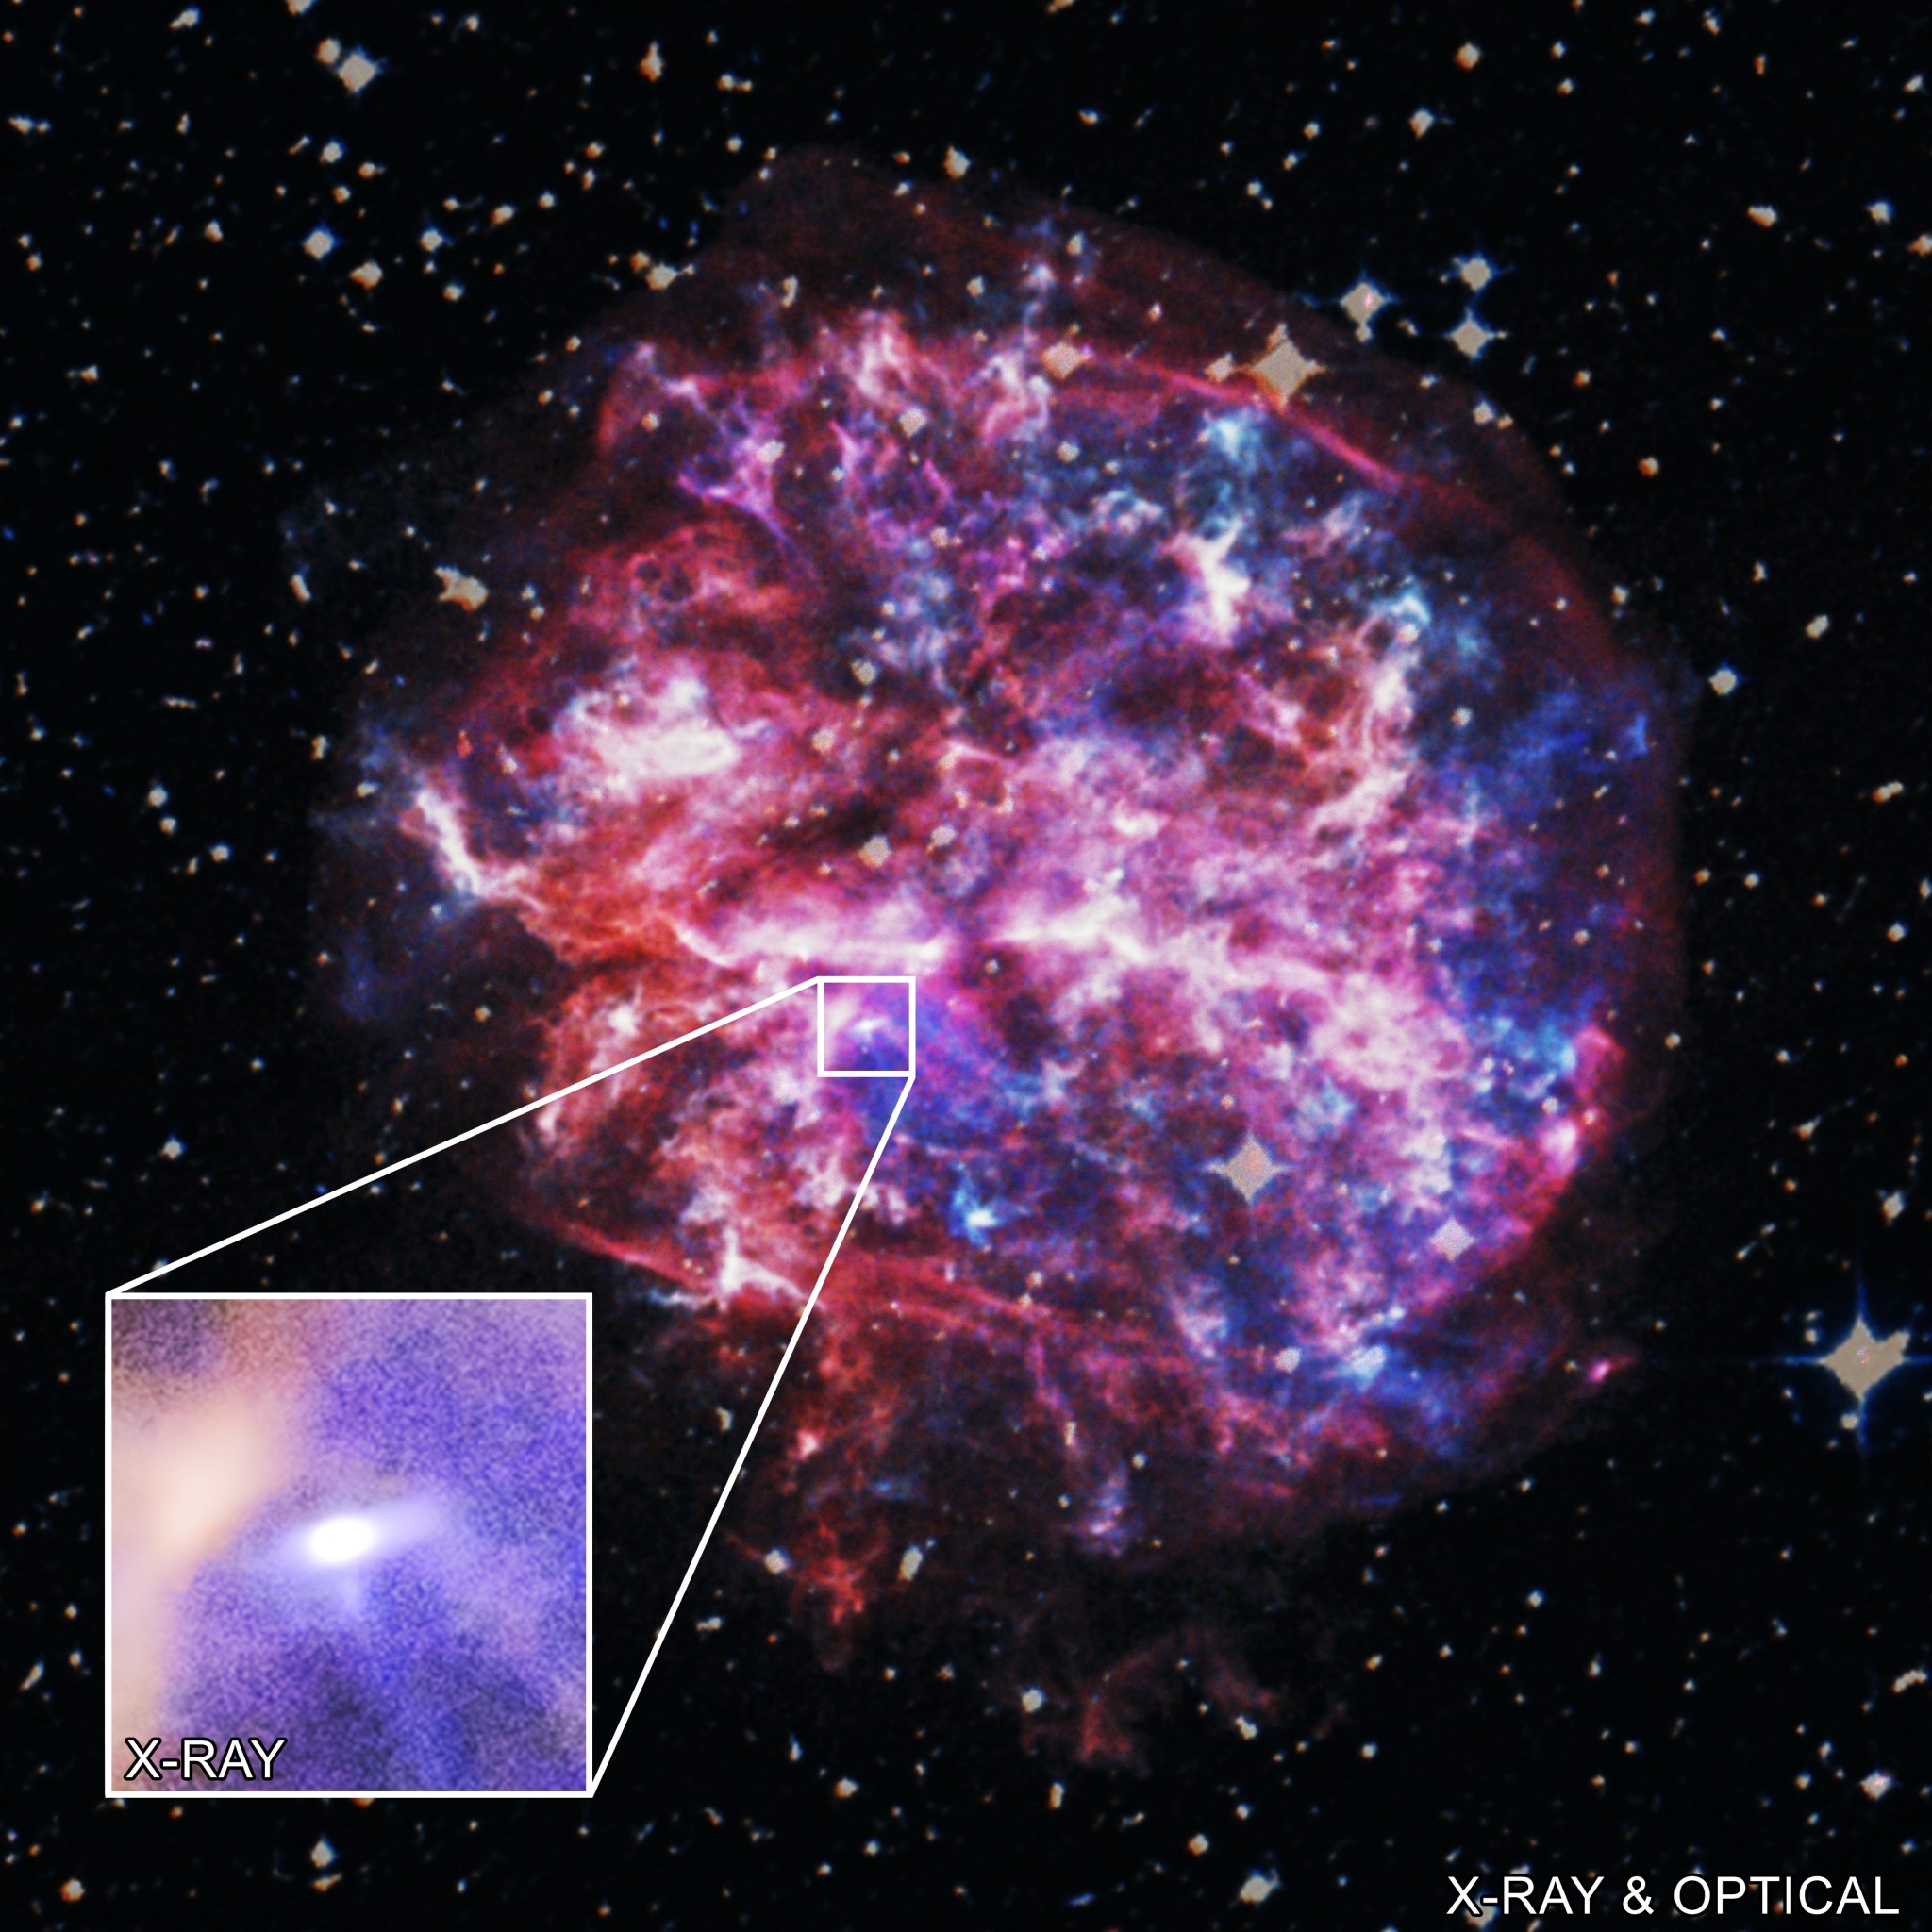 The G292.0+1.8 supernova remnant contains a pulsar moving at over a million miles per hour.